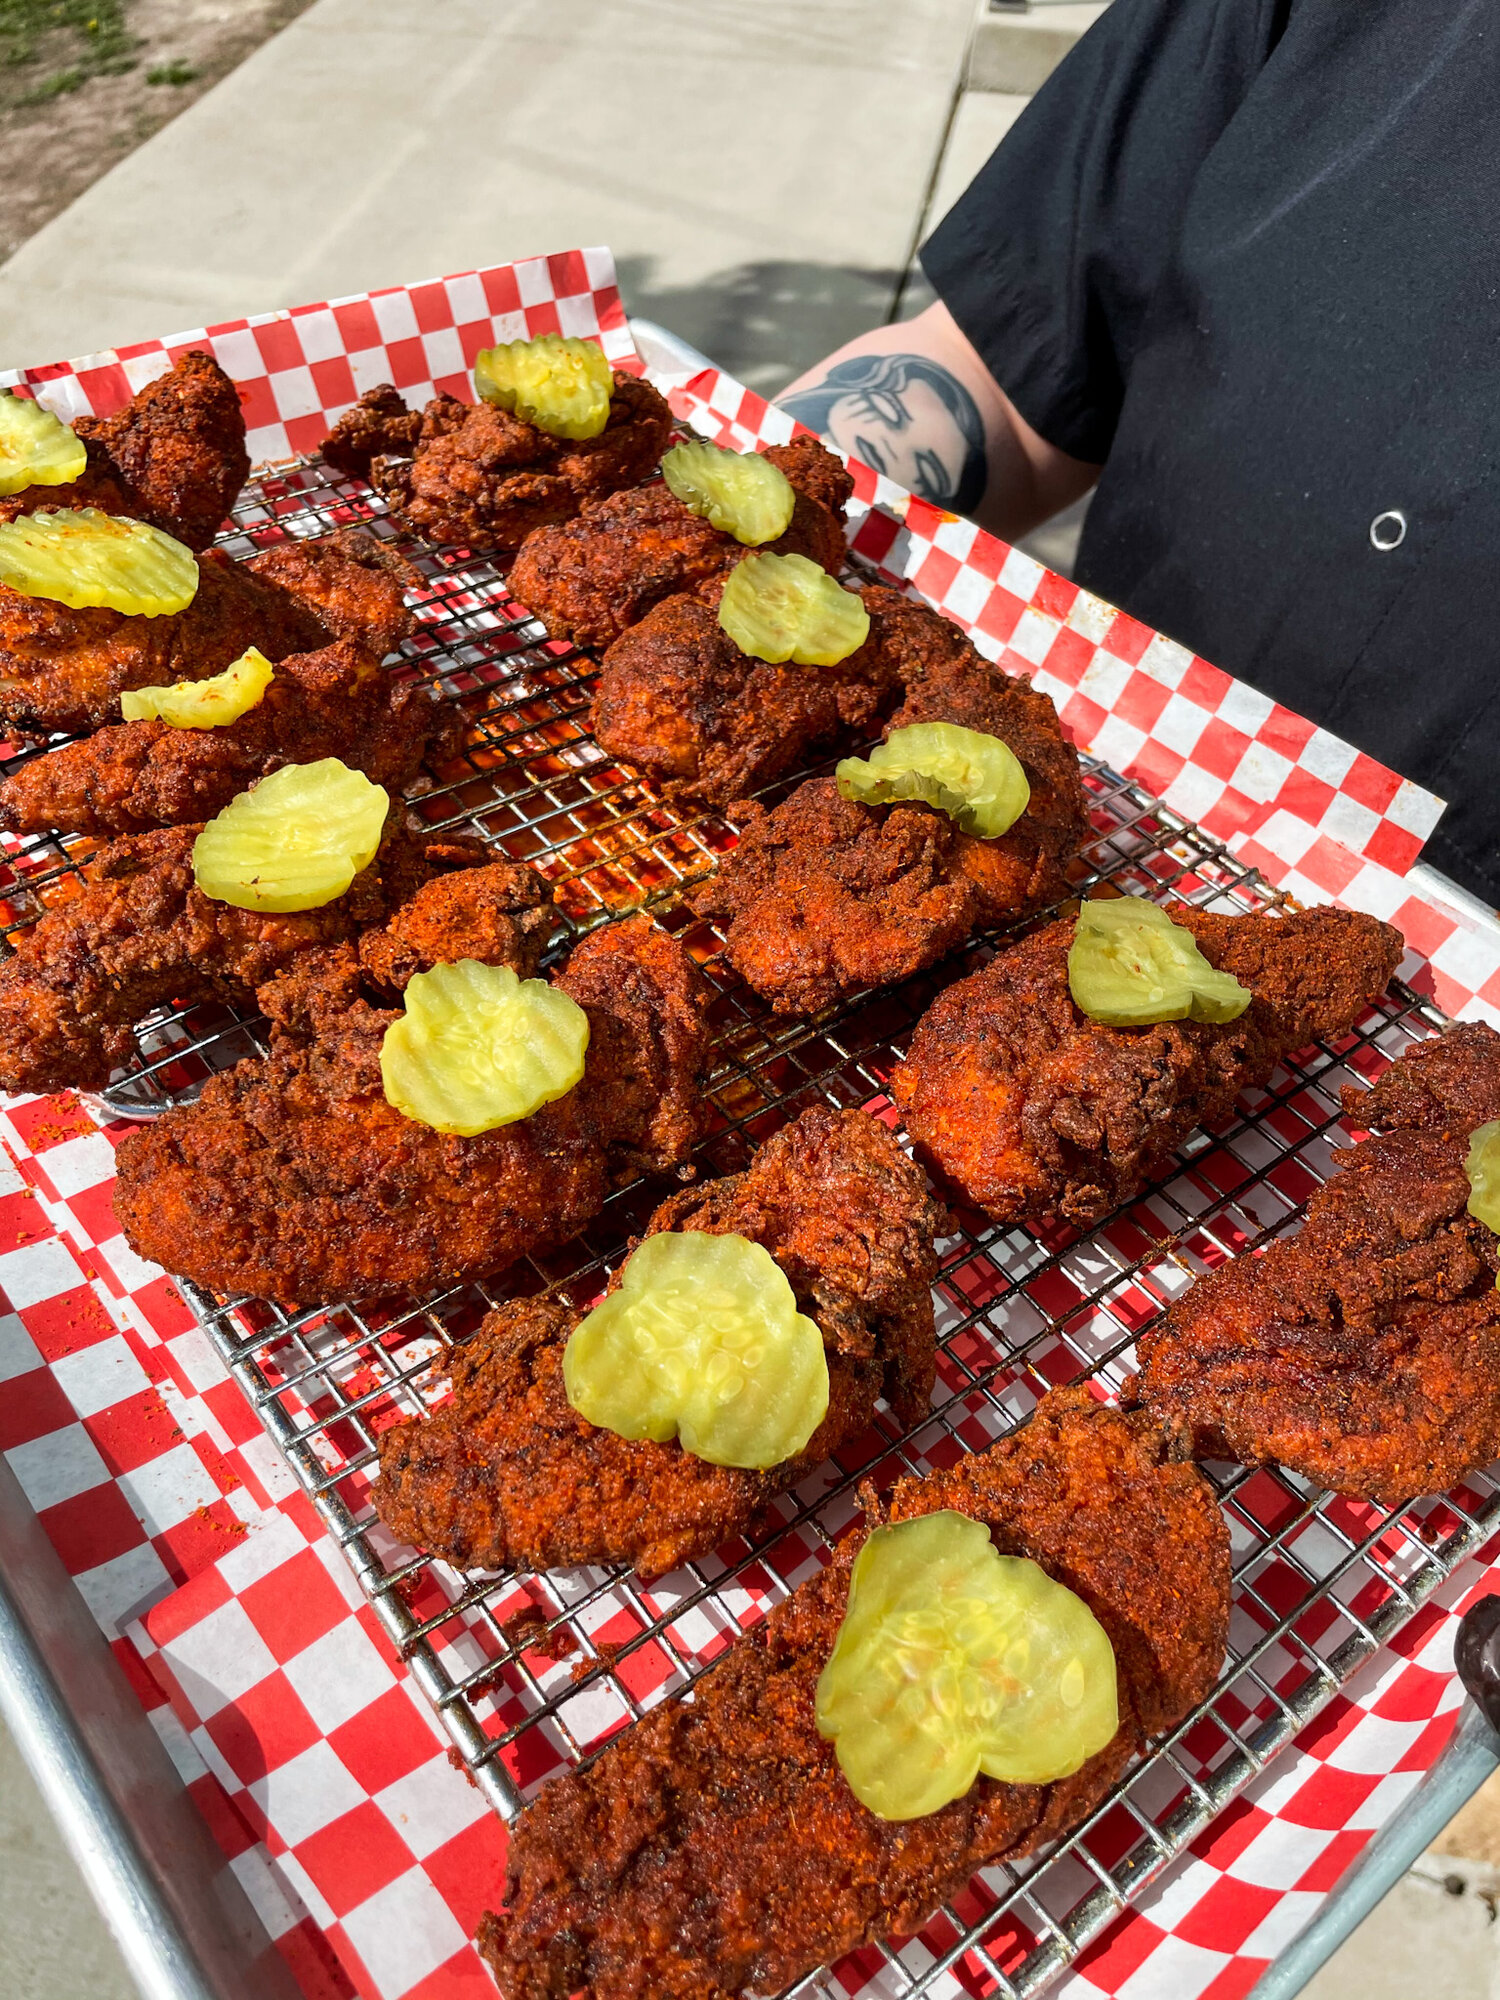 Fried chicken filets on a metal grate above red and white-checkered paper, all topped with a single pickle slice.